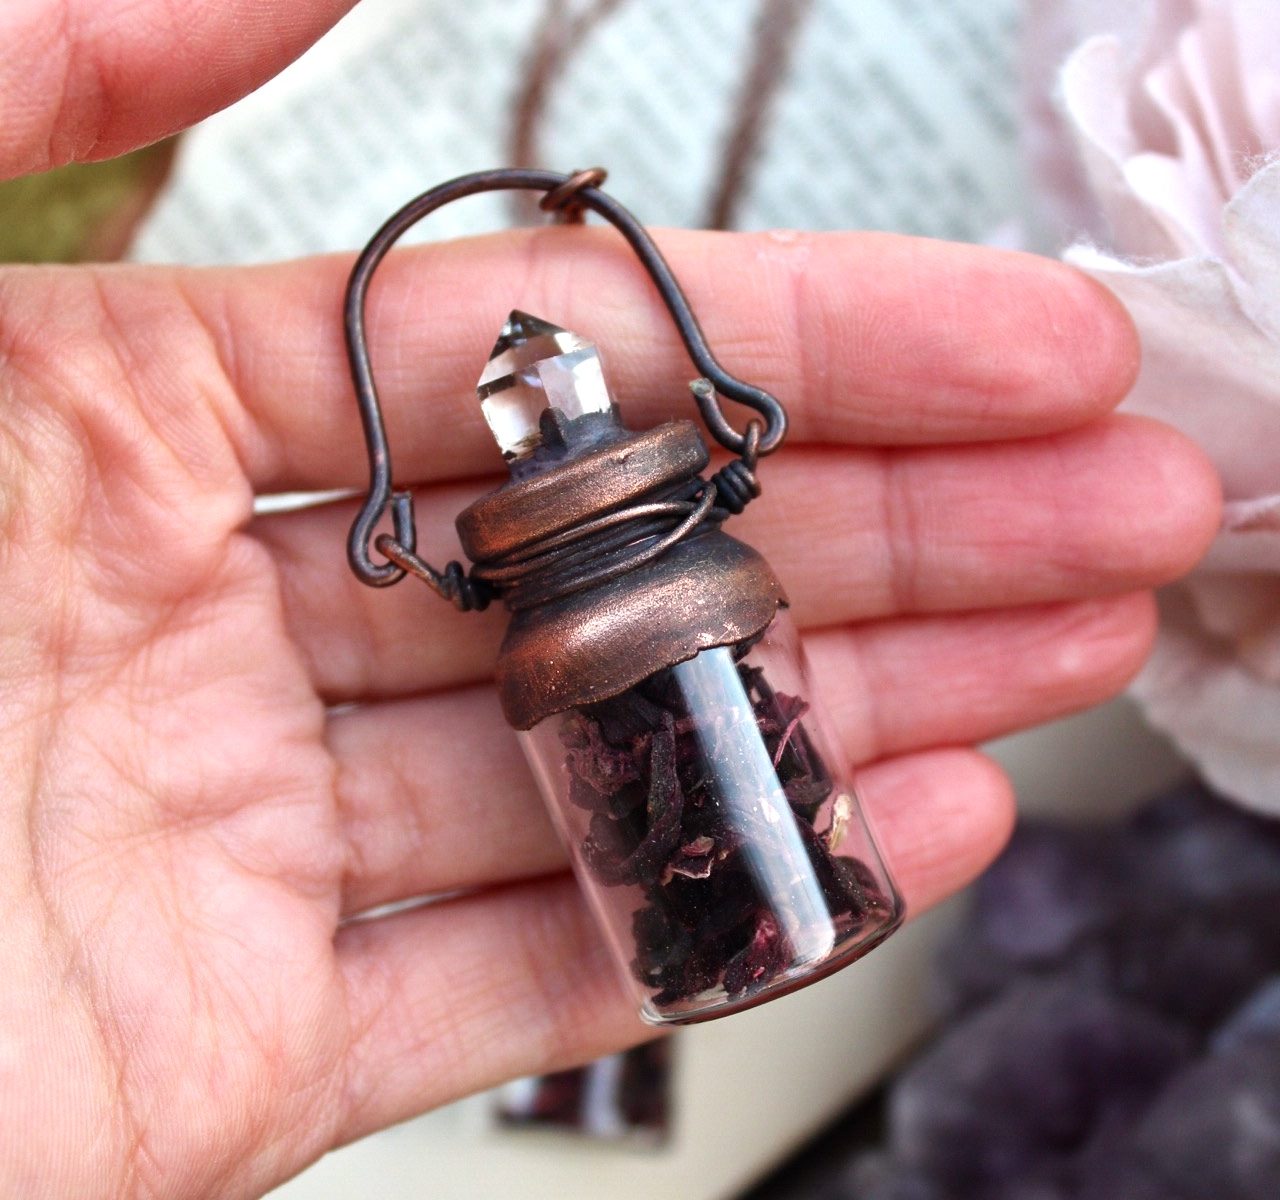 flower bottle necklace with hibiscus petals and clear quartz